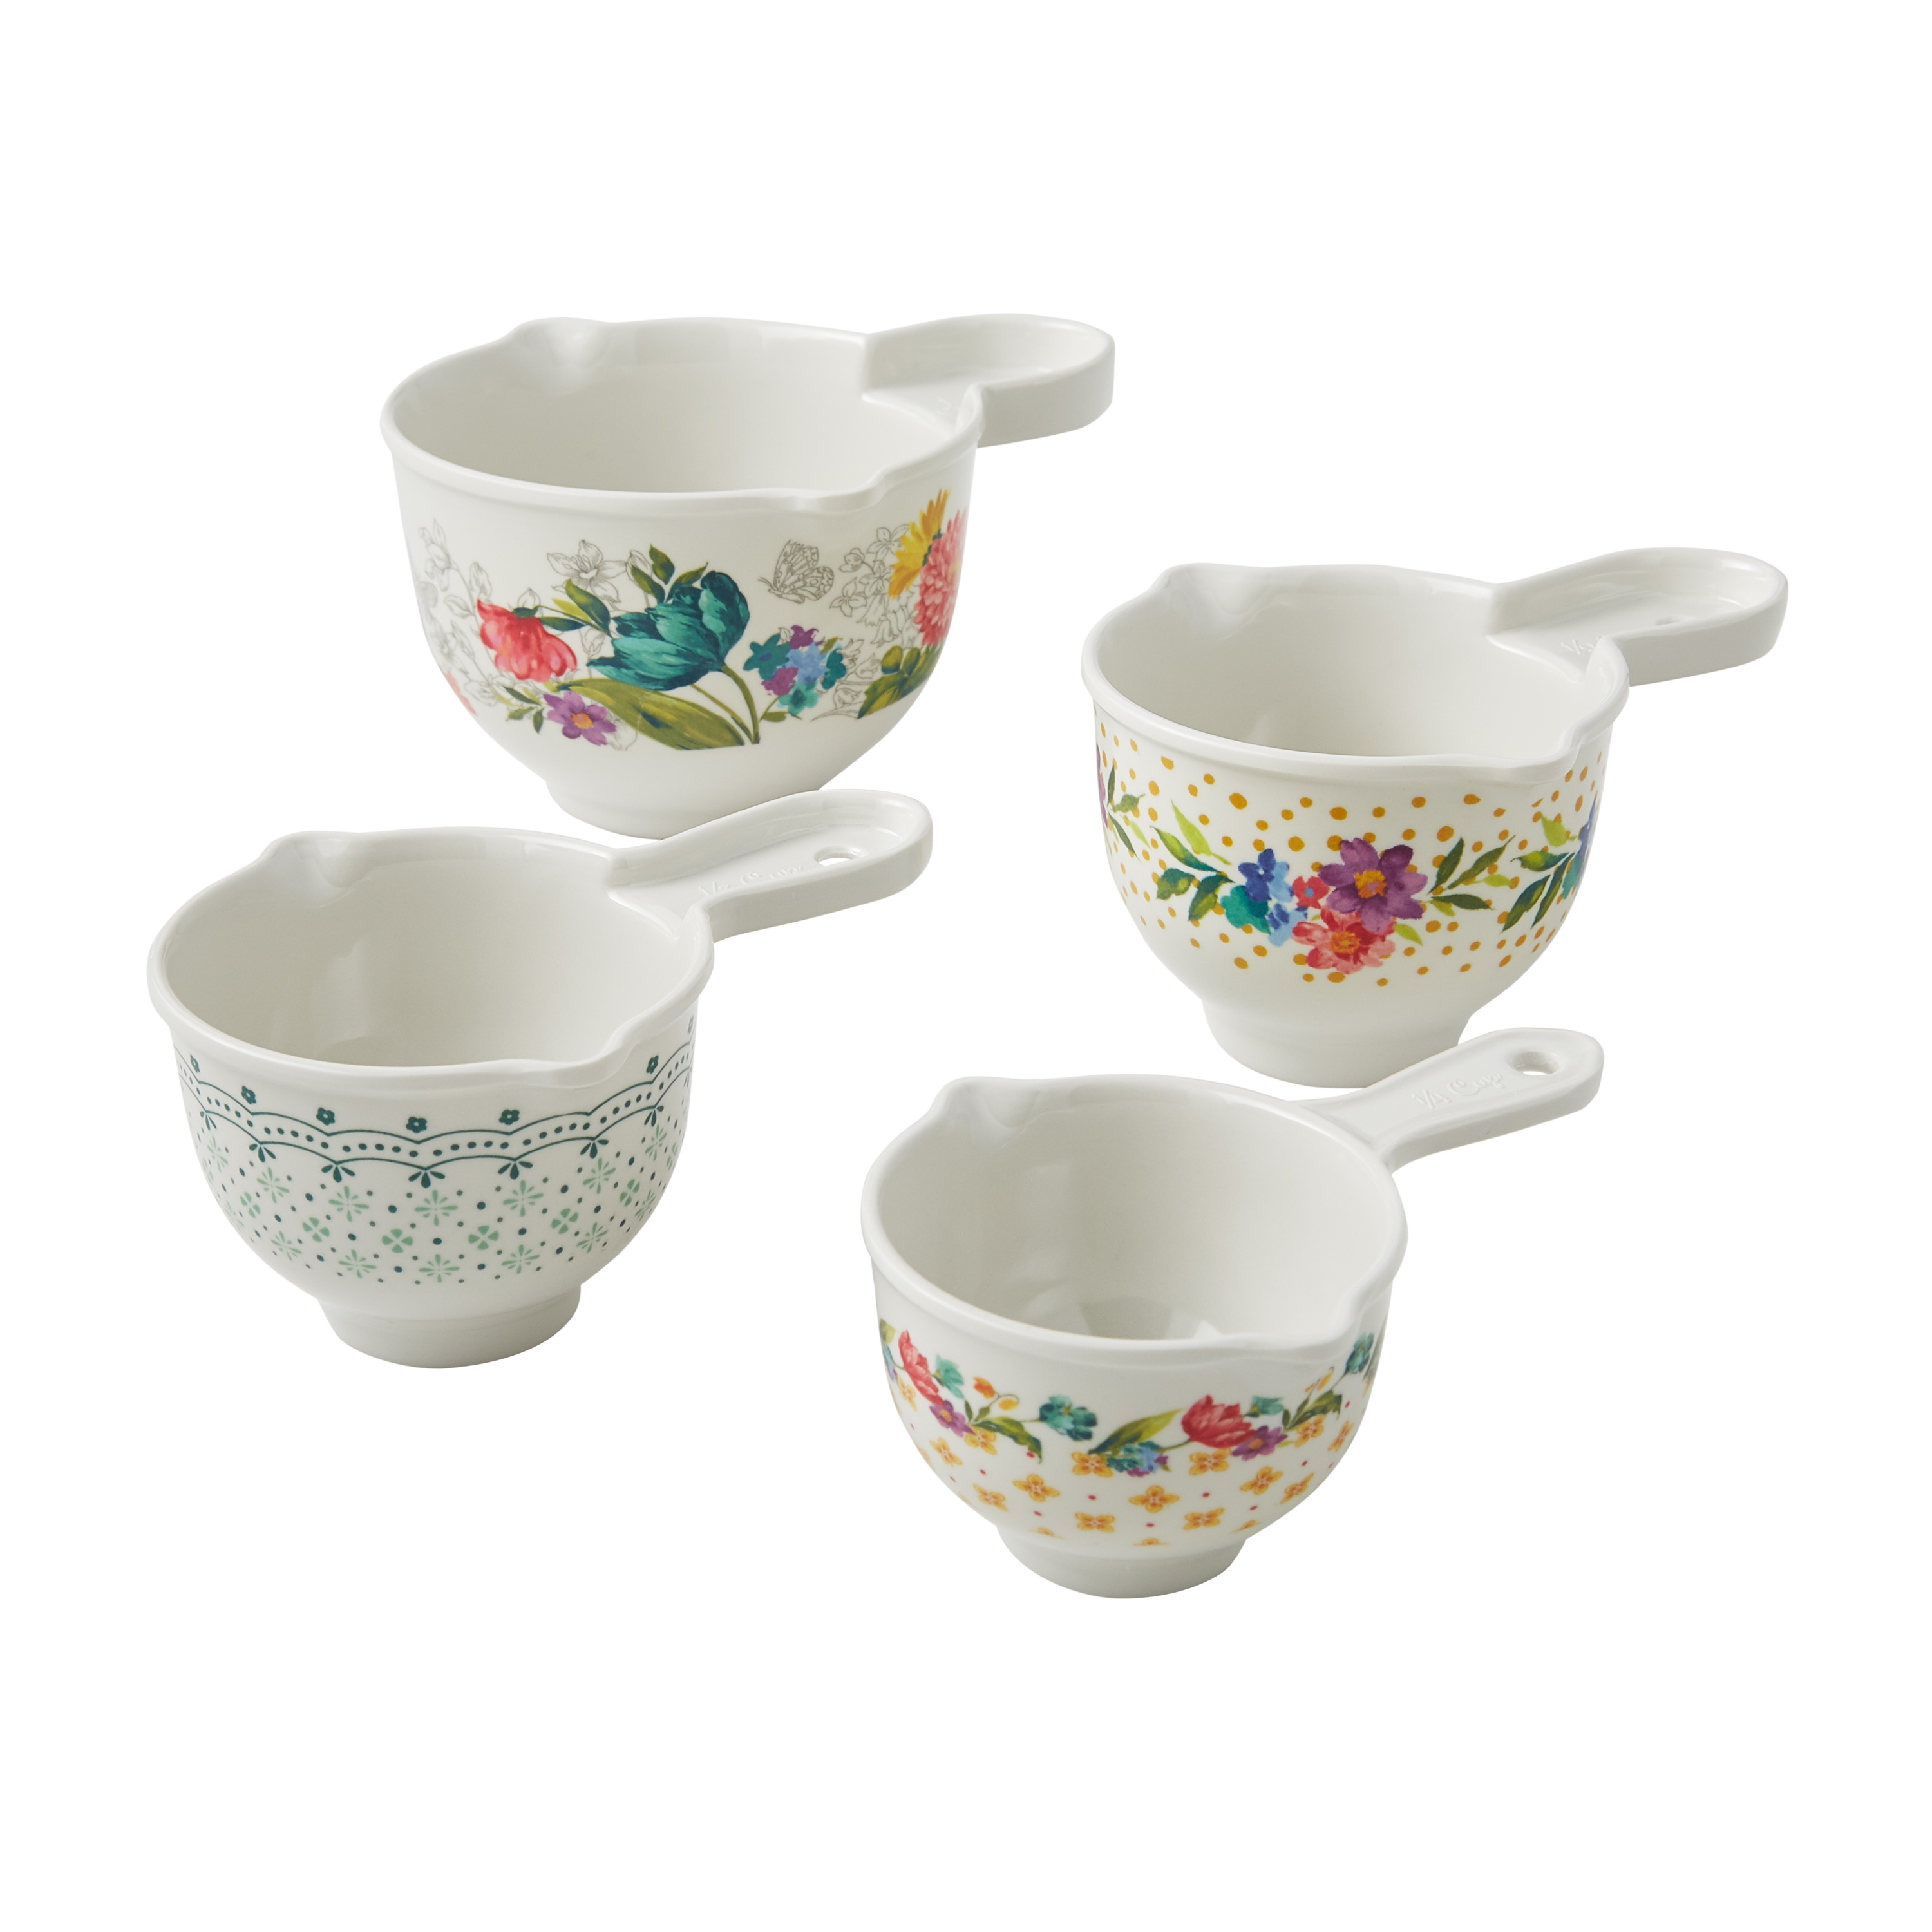 The Pioneer Woman Blooming Bouquet 20-Piece Bake & Prep Set with Baking Dish & Measuring Cups - image 5 of 8